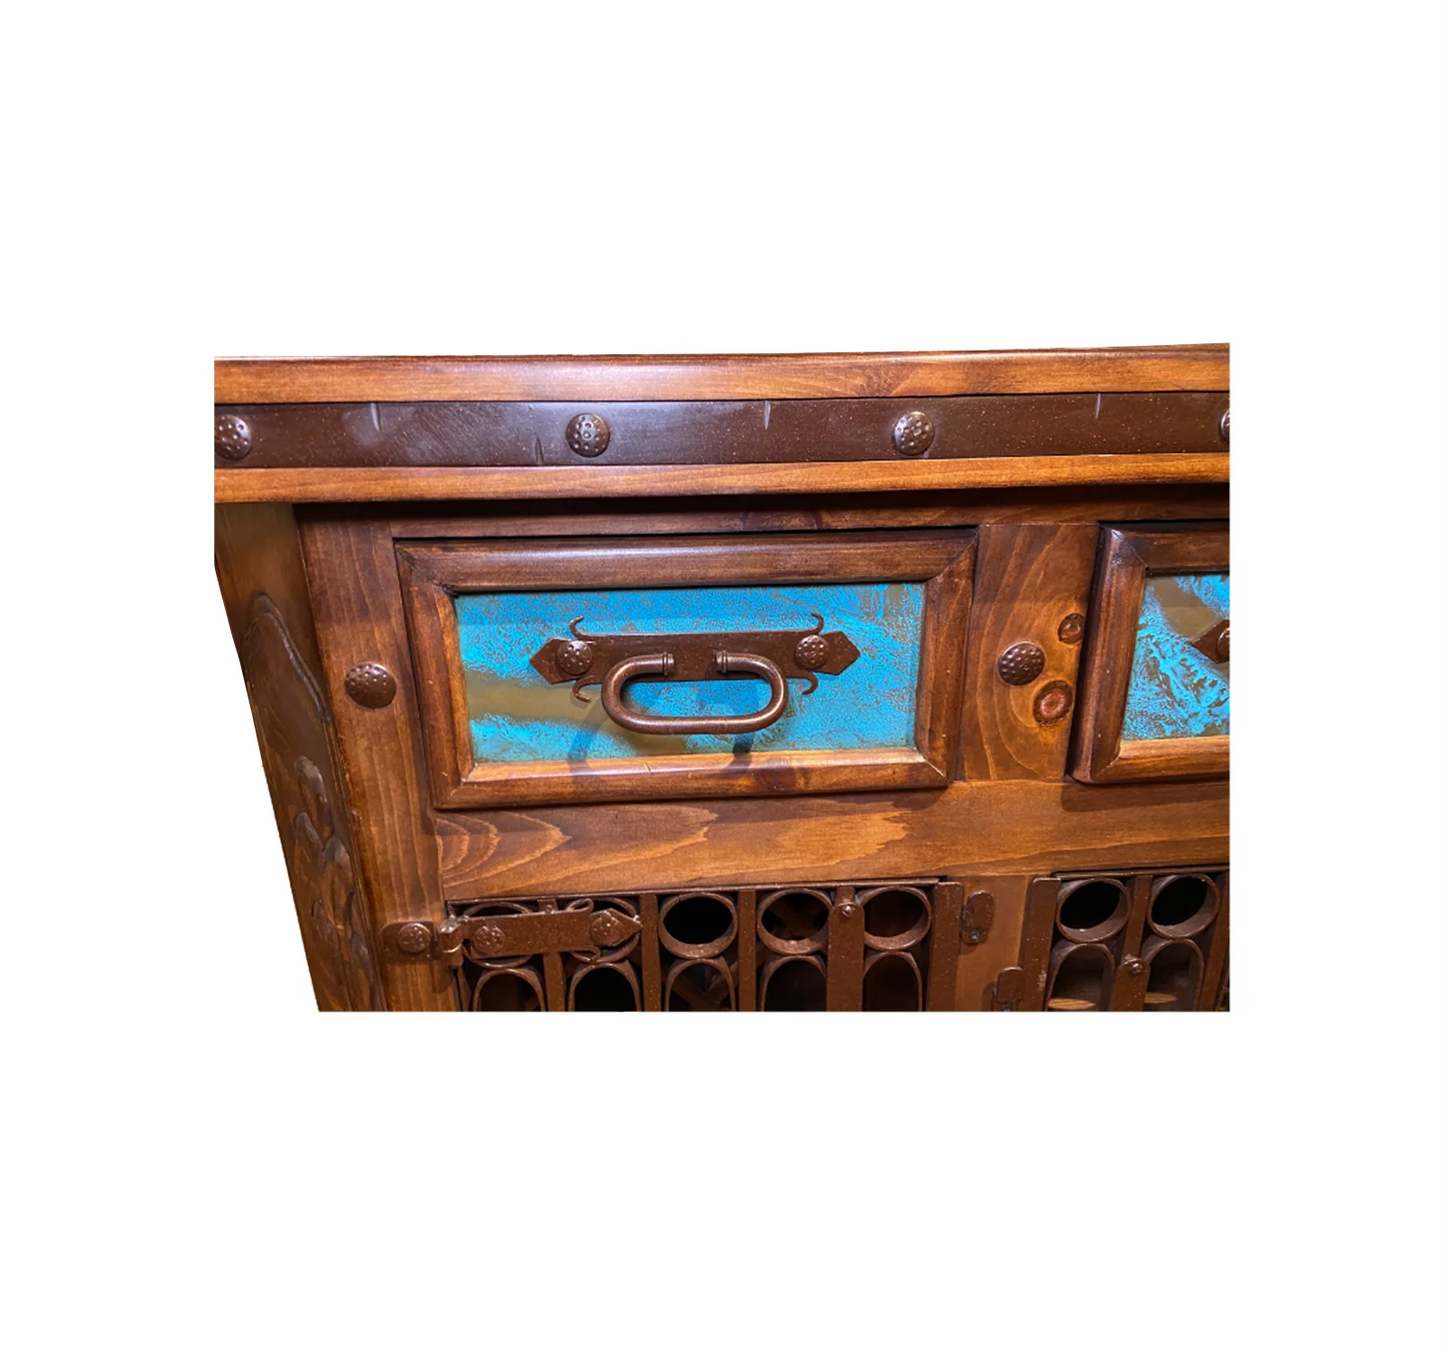 Copper front drawers